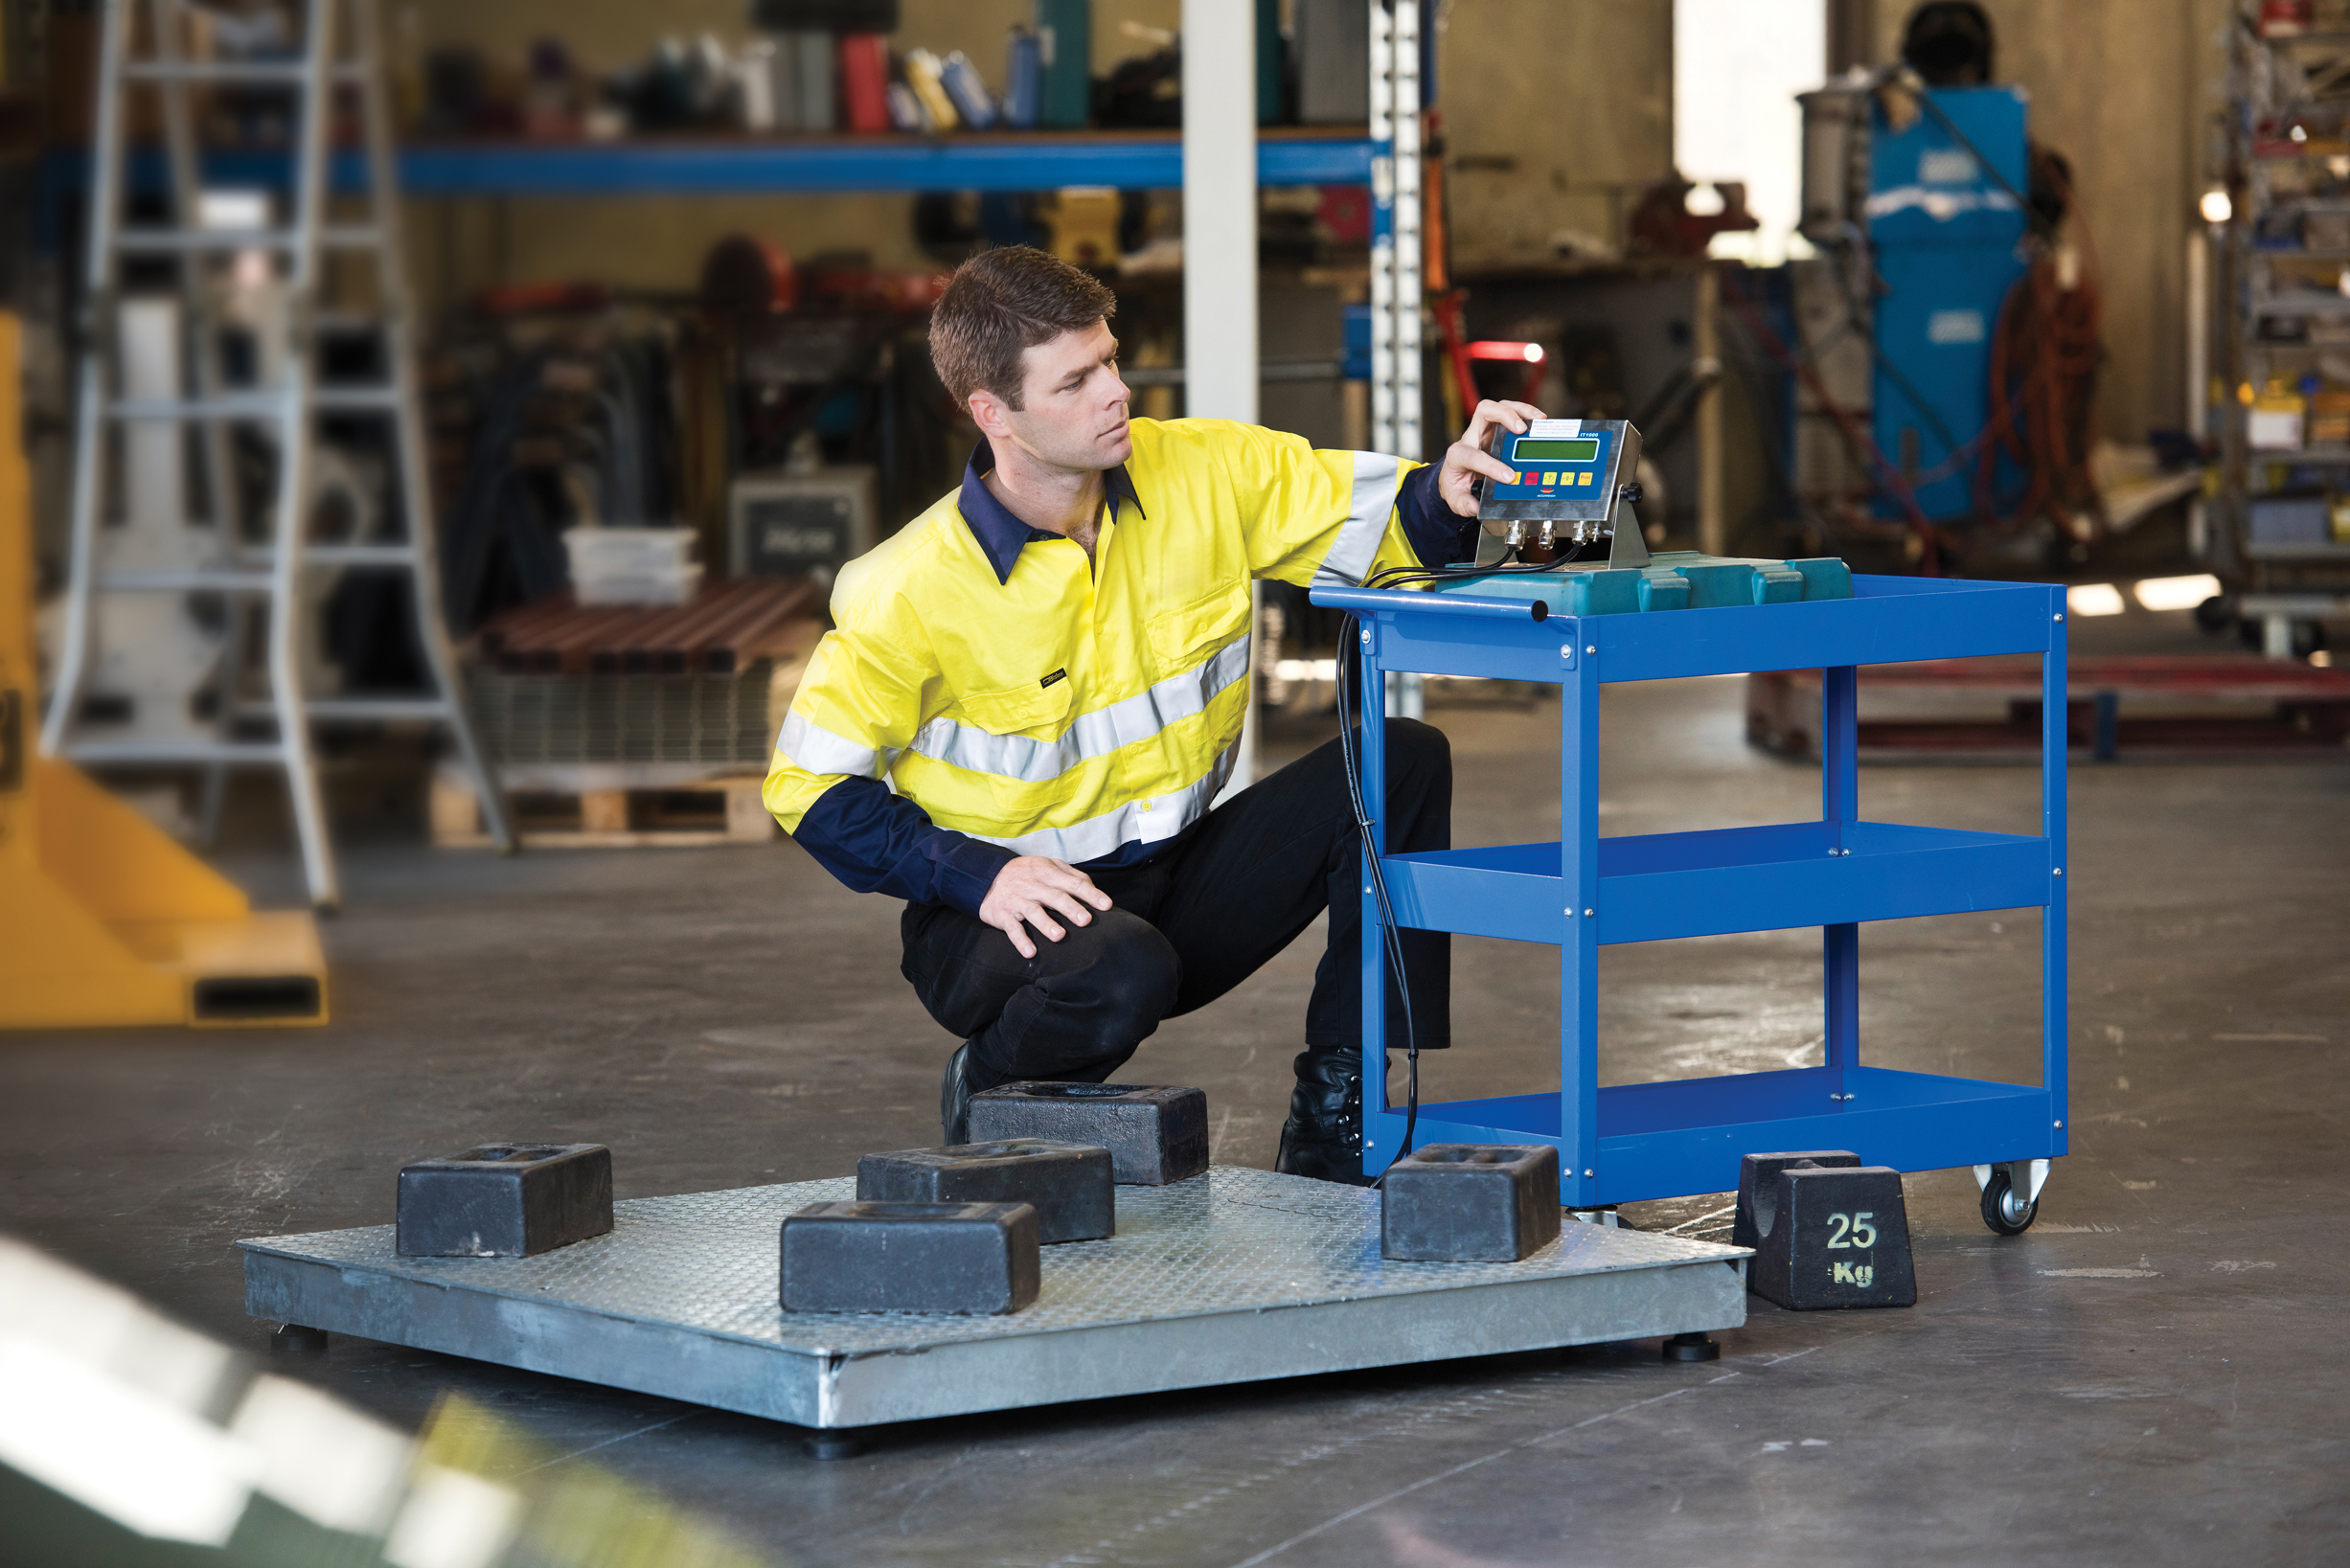 A300 Pallet Scale being calibrated